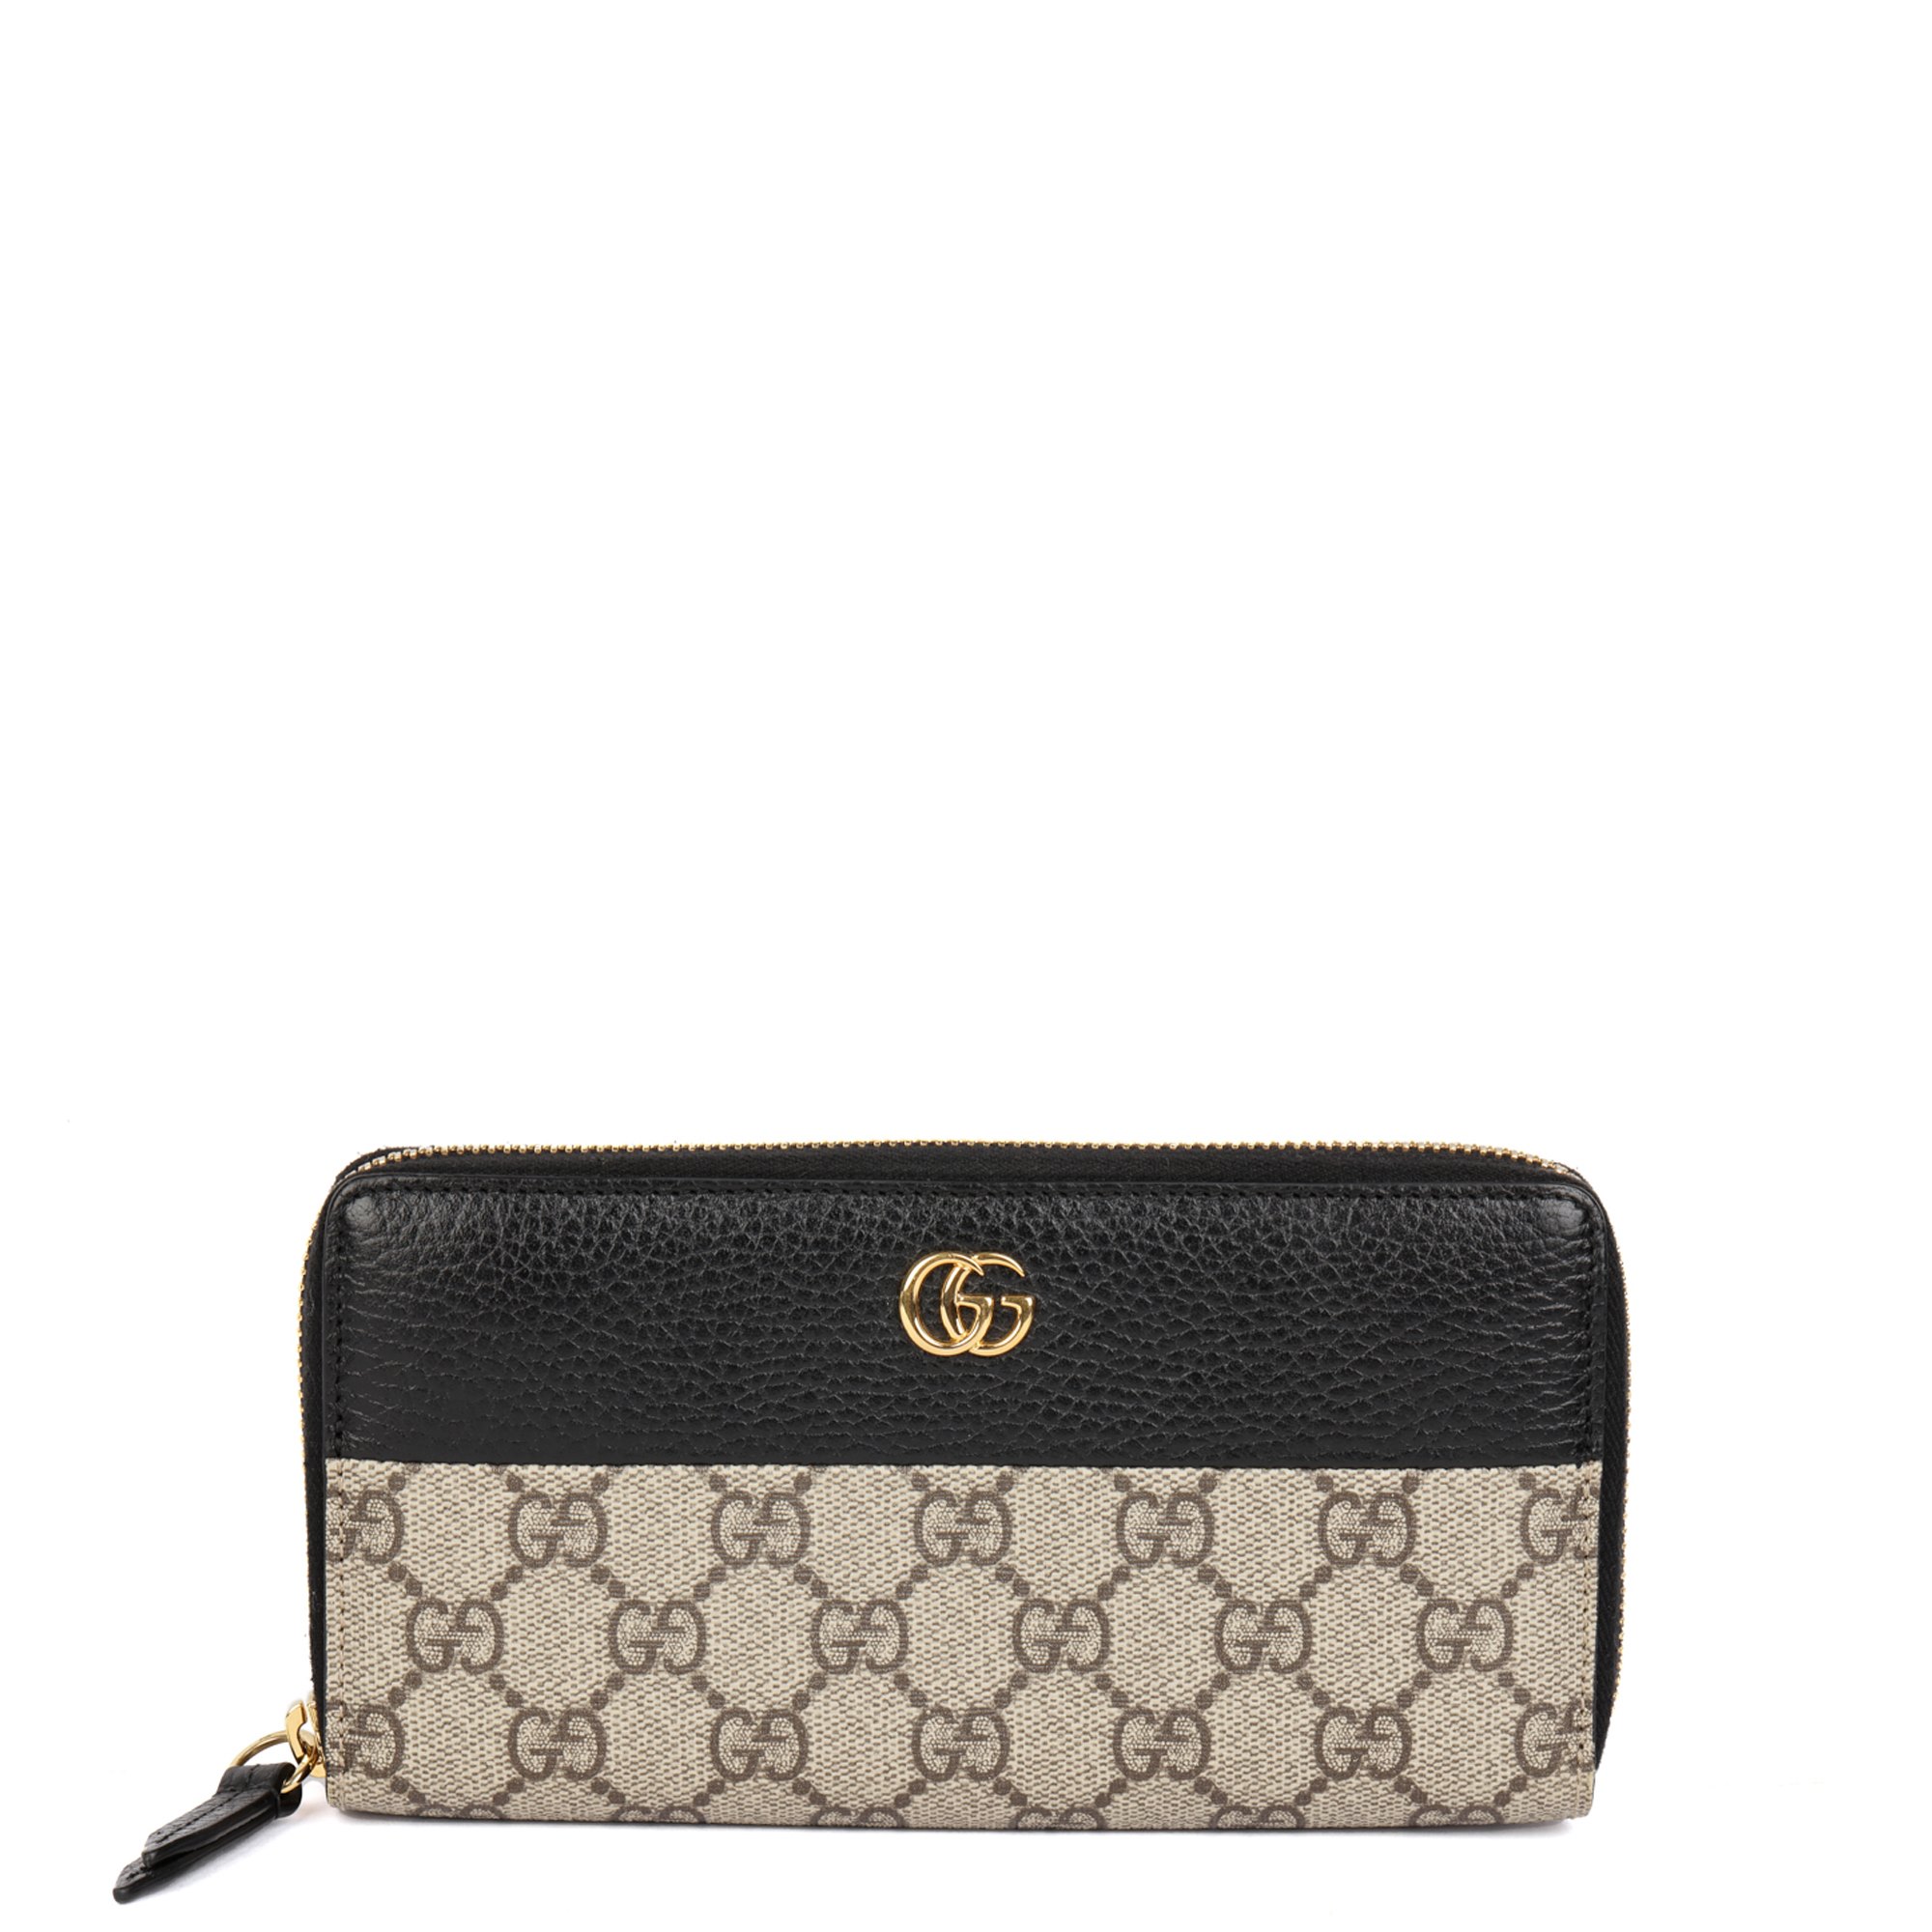 Gucci Beige, Ebony & Black GG Supreme Canvas and Leather GG Marmont Zip Around Wallet